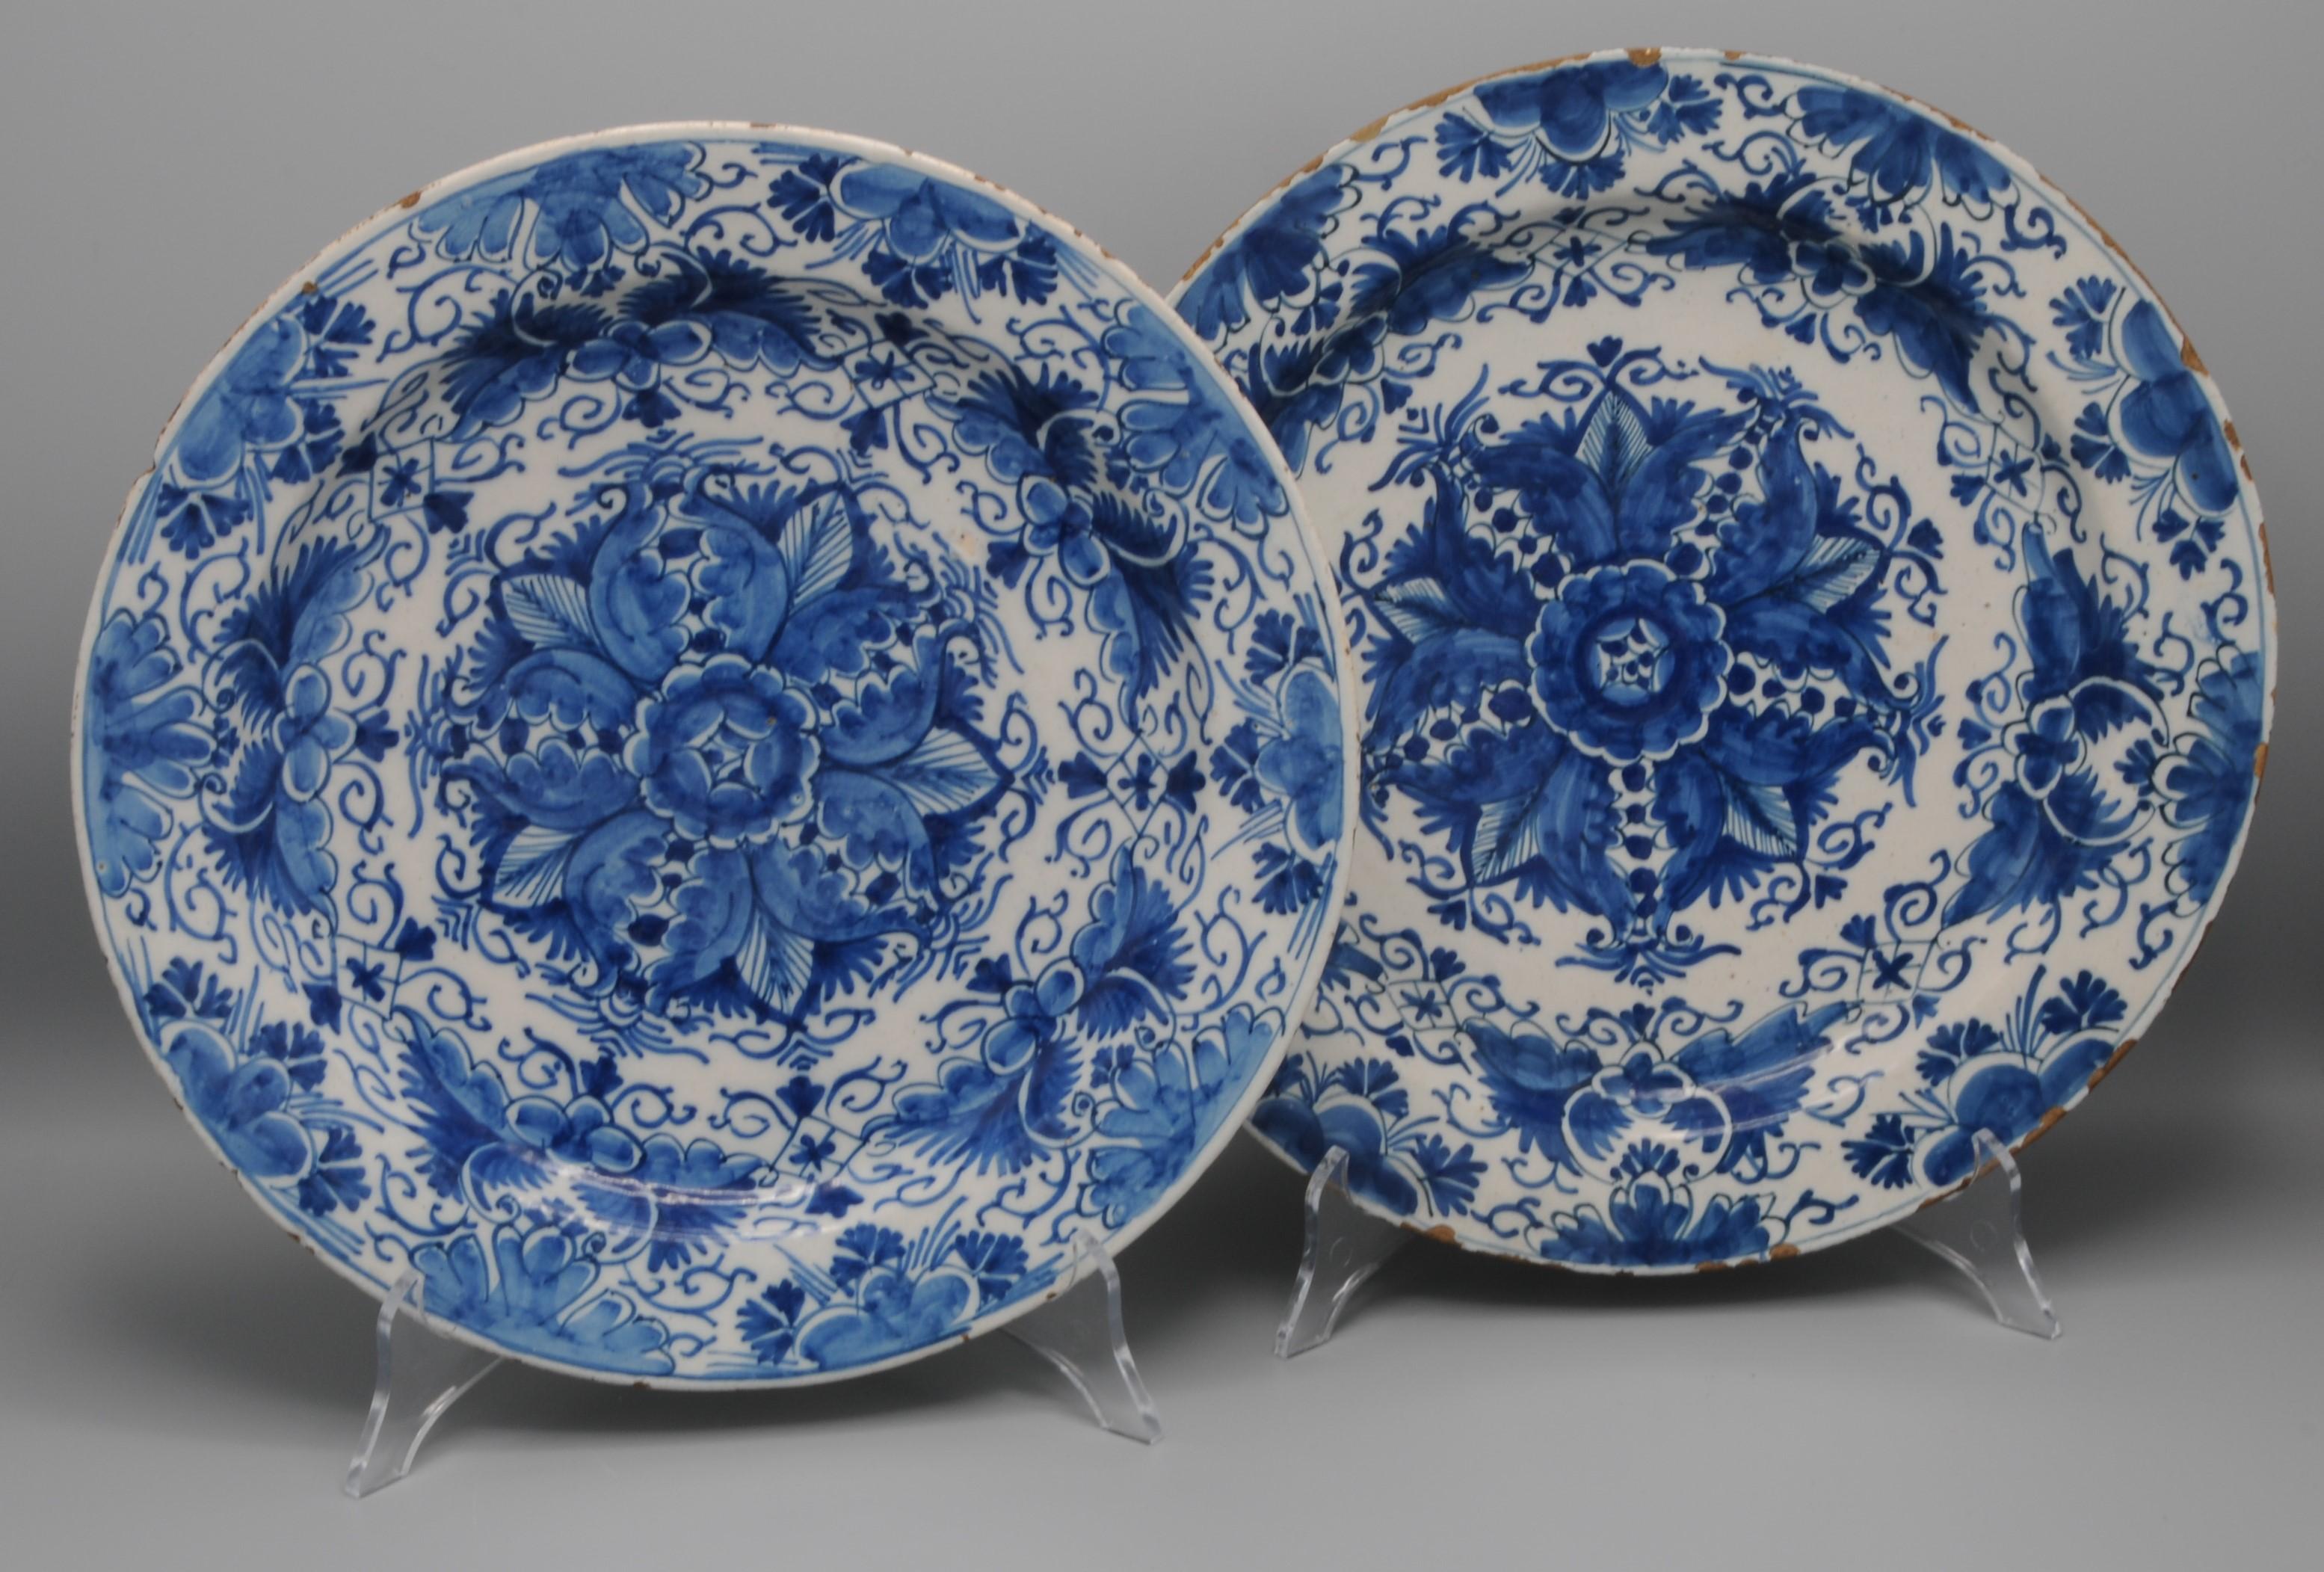 Excellent pair of mid 18th century Delftware plates with a rare geometrical decoration of a stylized flower with foliate scrolls. 
Border adorned with foliage scrolls and flower sprigs. 

Unmarked